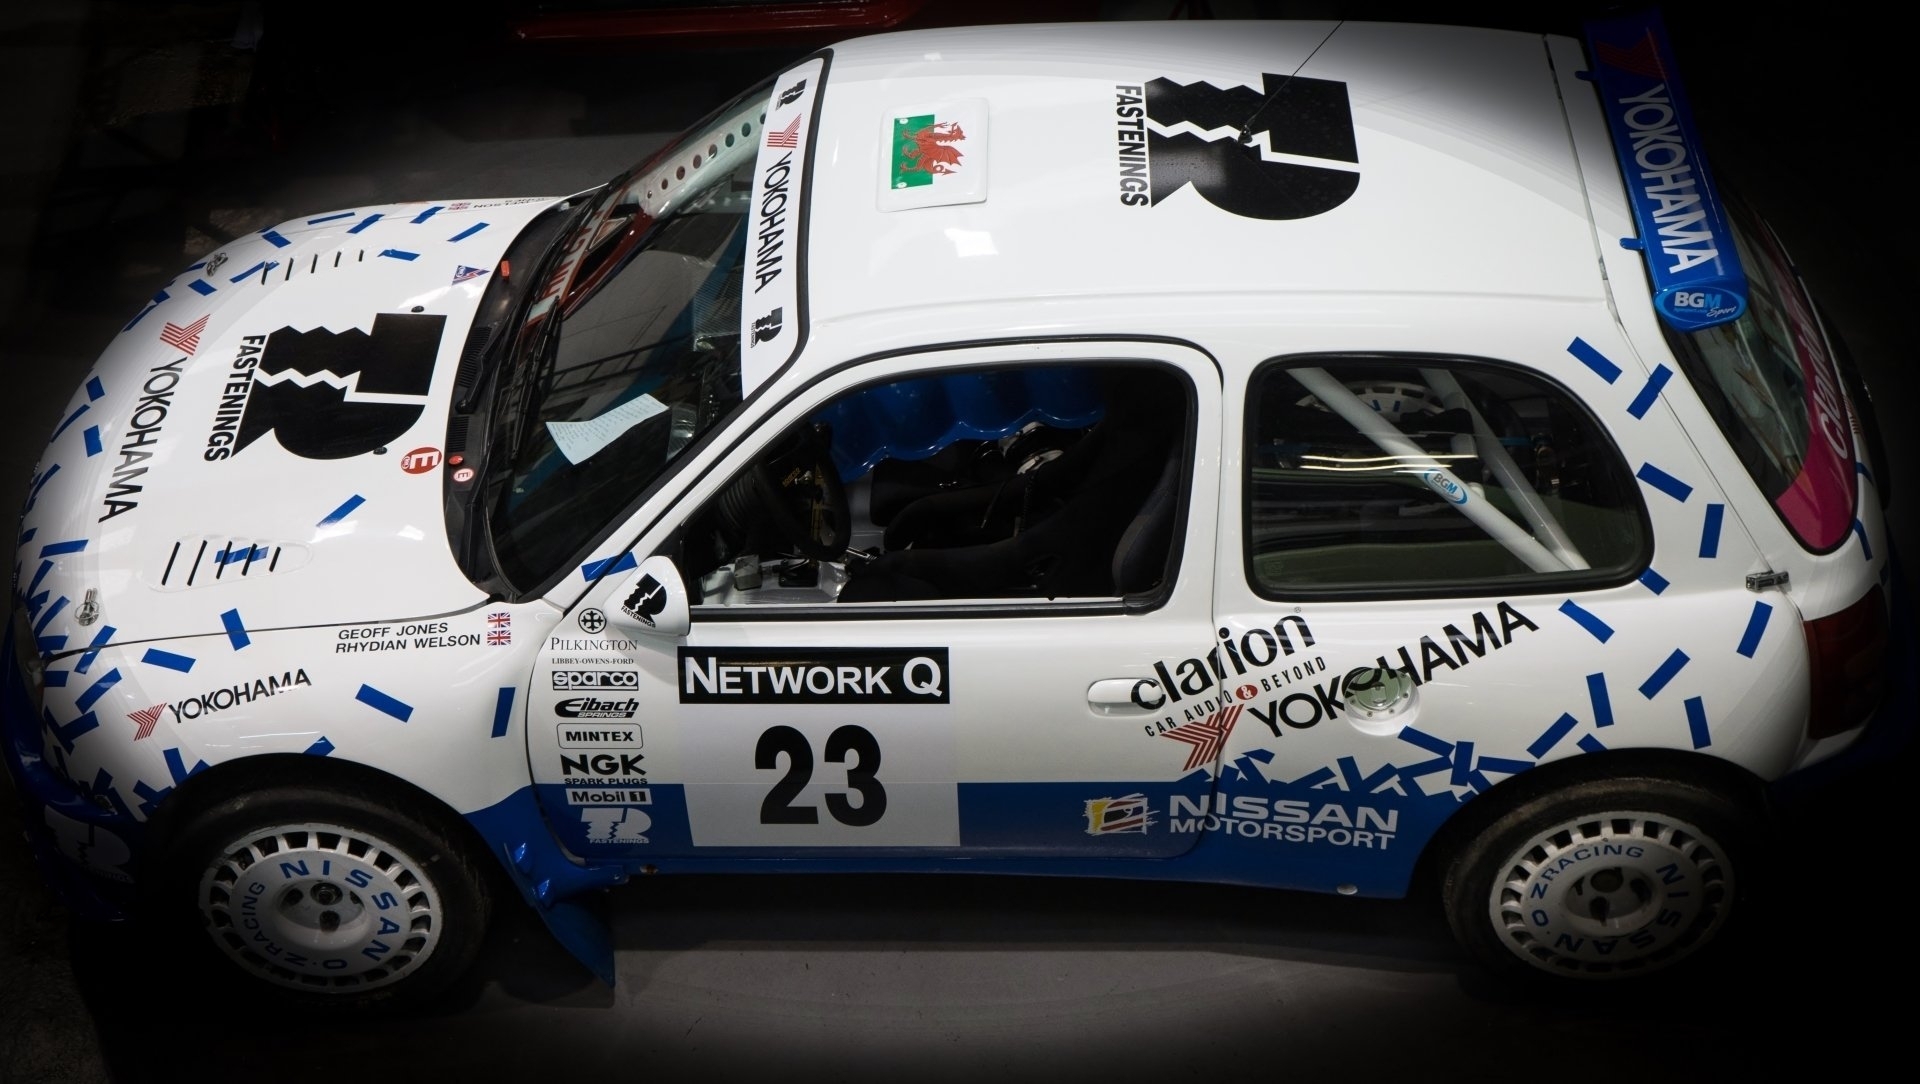 nissan-micra-kit-car-p5-nme-21-small